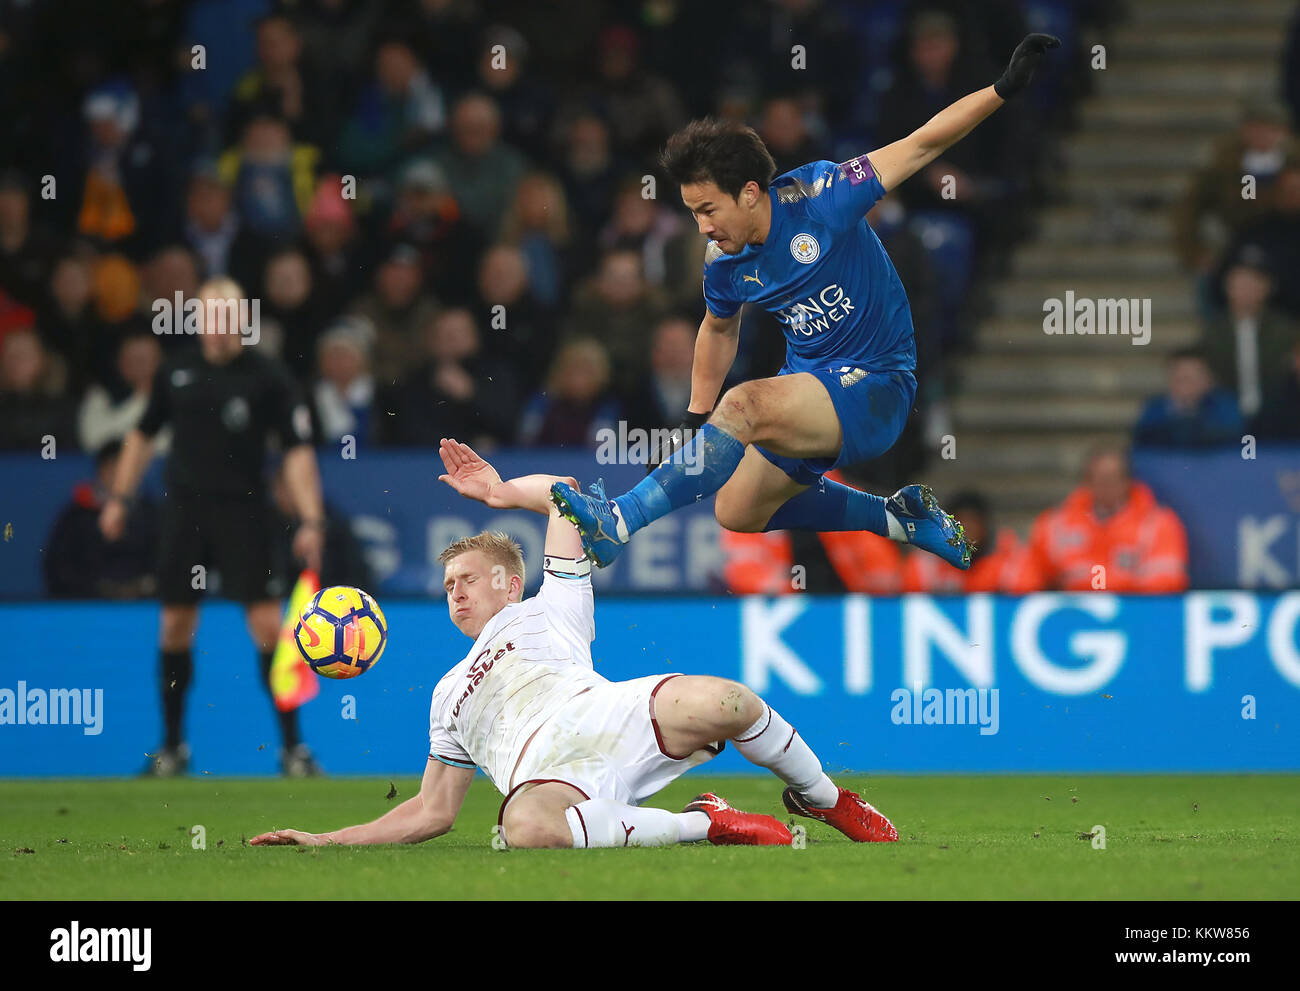 Leicester City's Shinji Okazaki (right) and Burnley's Ben Mee battle for the ball during the Premier League match at the King Power Stadium, Leicester. PRESS ASSOCIATION Photo Picture date: Saturday December 2, 2017. See PA story SOCCER Leicester. Photo credit should read: Mike Egerton/PA Wire. RESTRICTIONS: No use with unauthorised audio, video, data, fixture lists, club/league logos or 'live' services. Online in-match use limited to 75 images, no video emulation. No use in betting, games or single club/league/player publications. Stock Photo